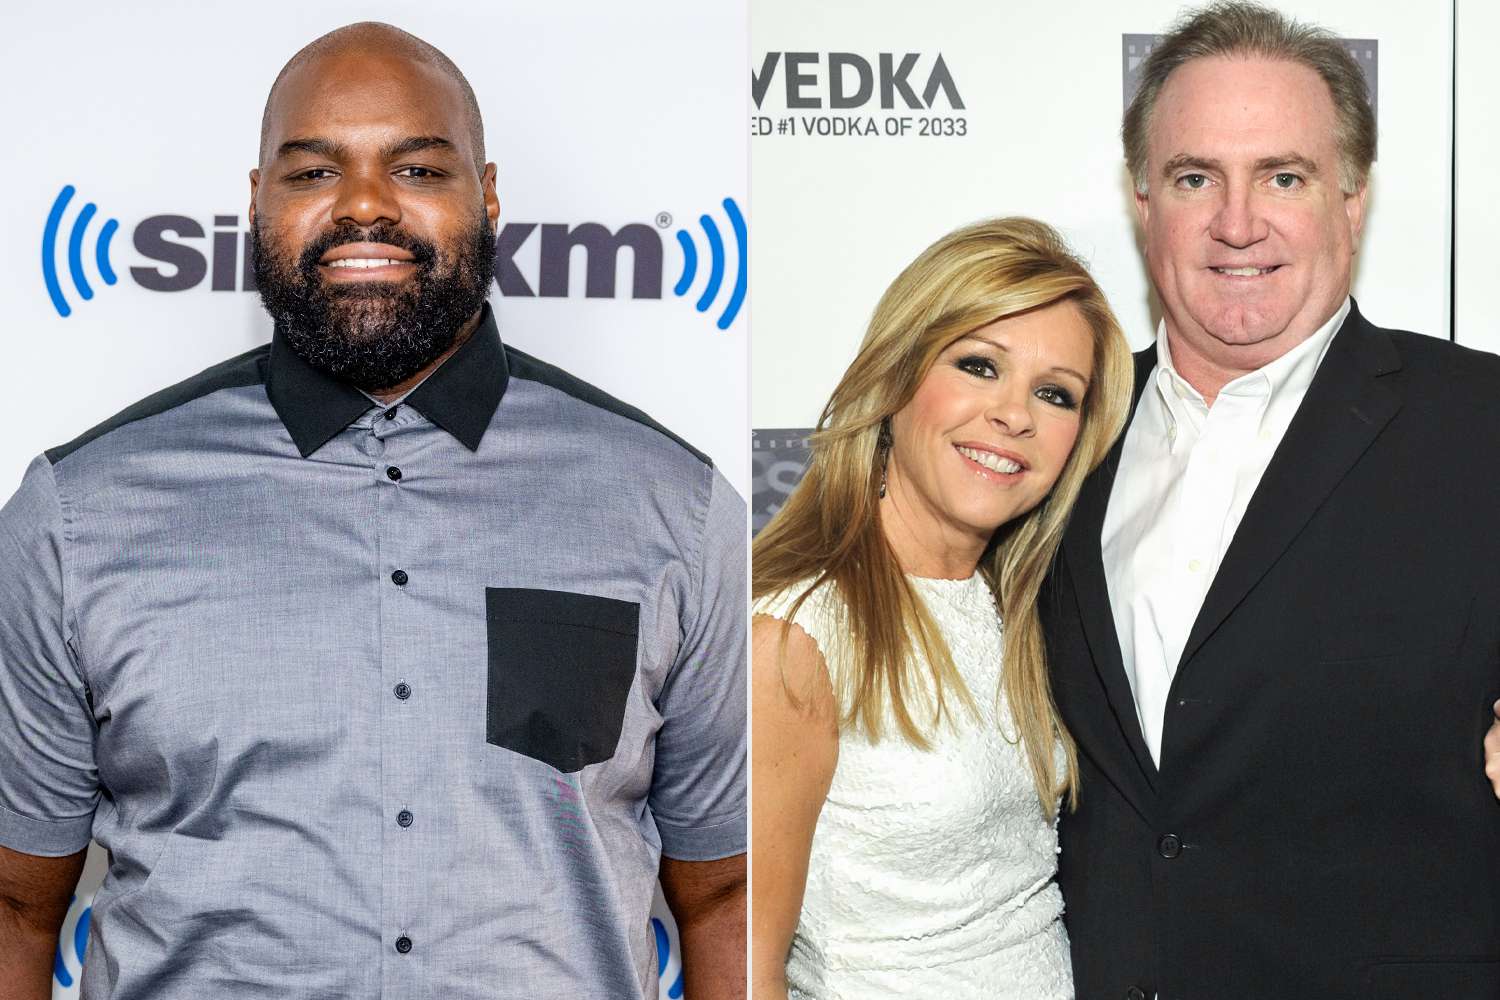 Tuohy Family Say Michael Oher Extorted Them, Claim He ‘Demanded $15m’